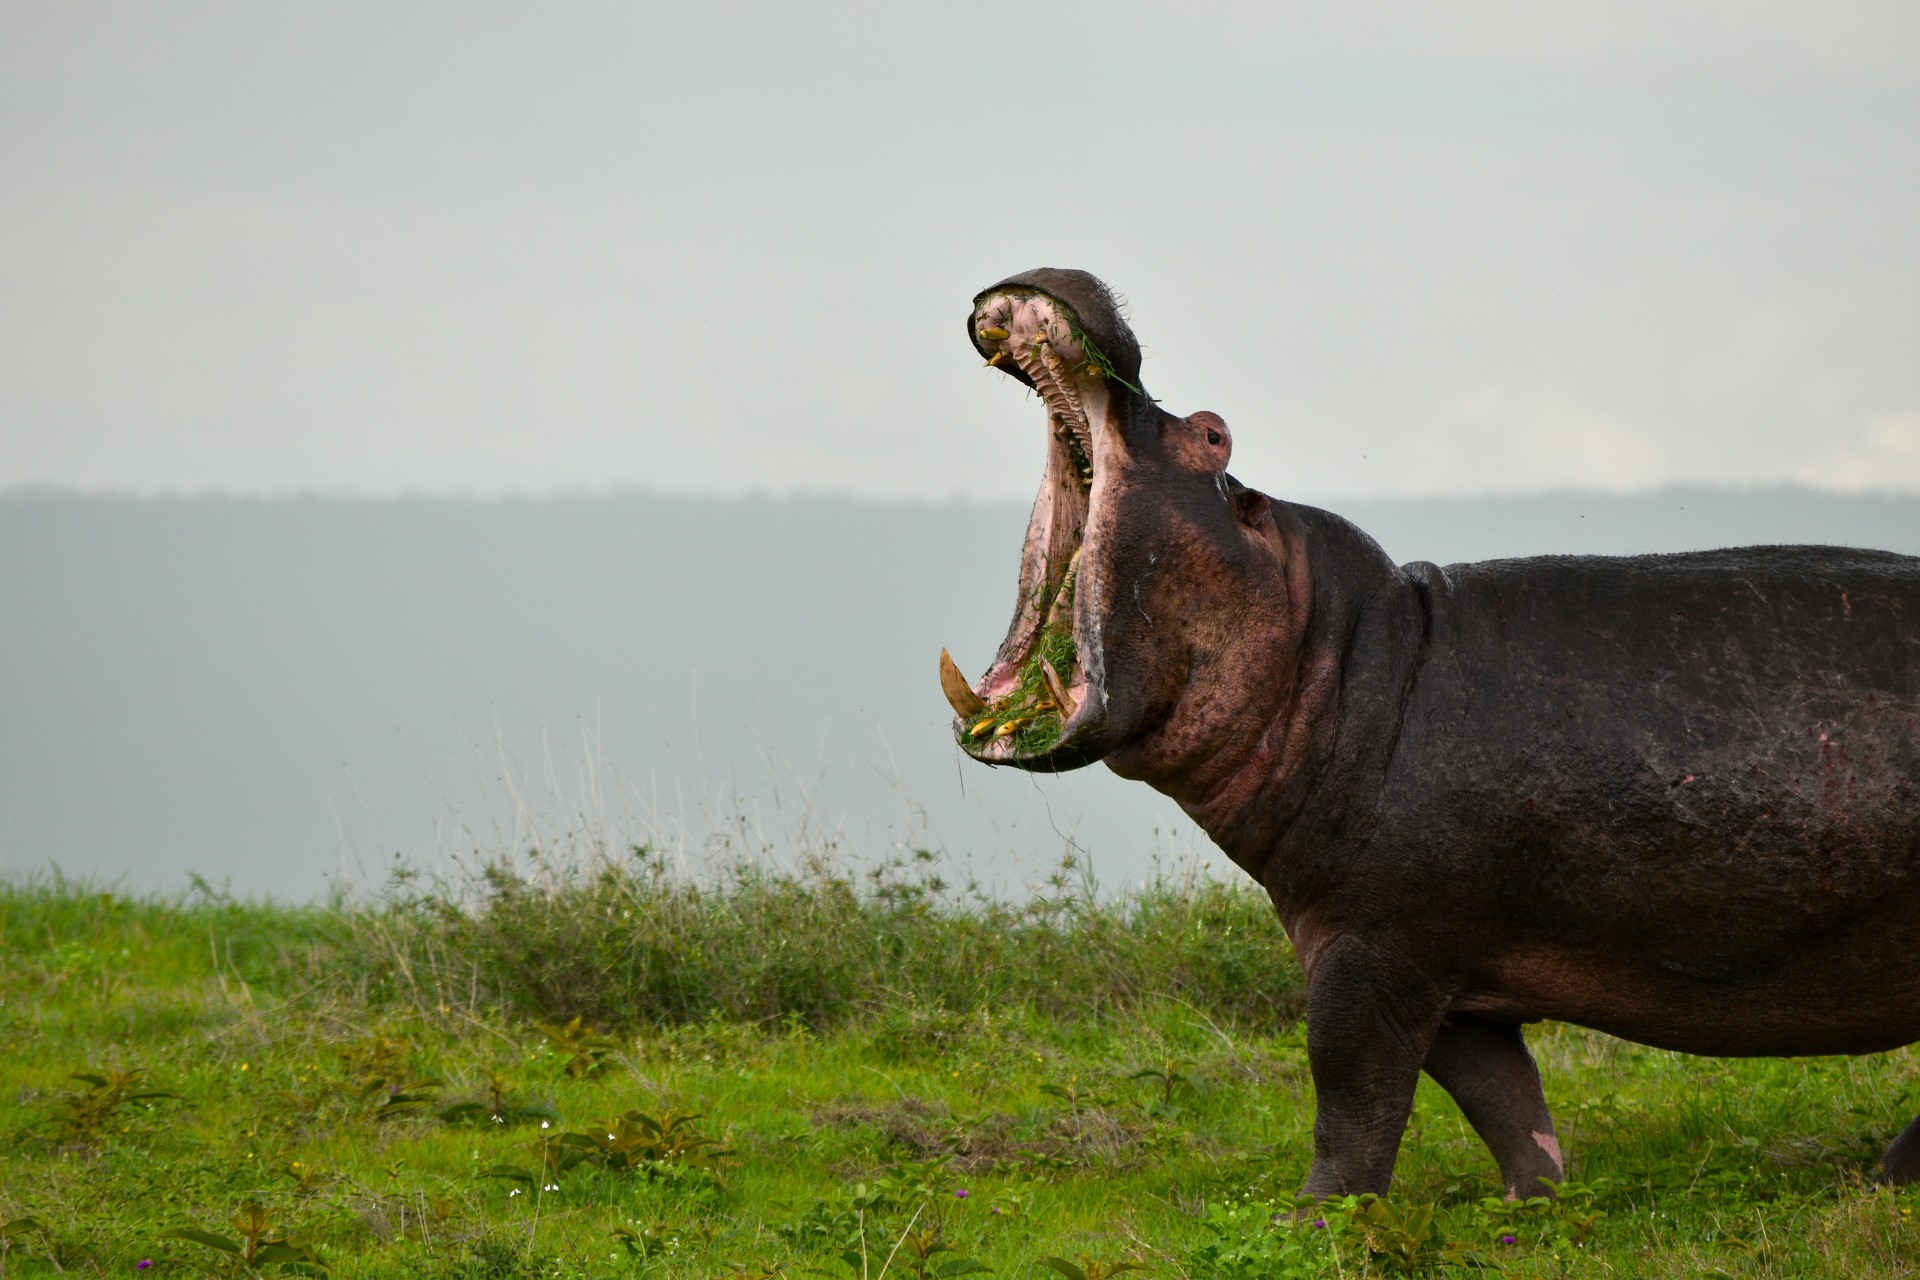 A hippo standing in open grassland with its mouth wide open